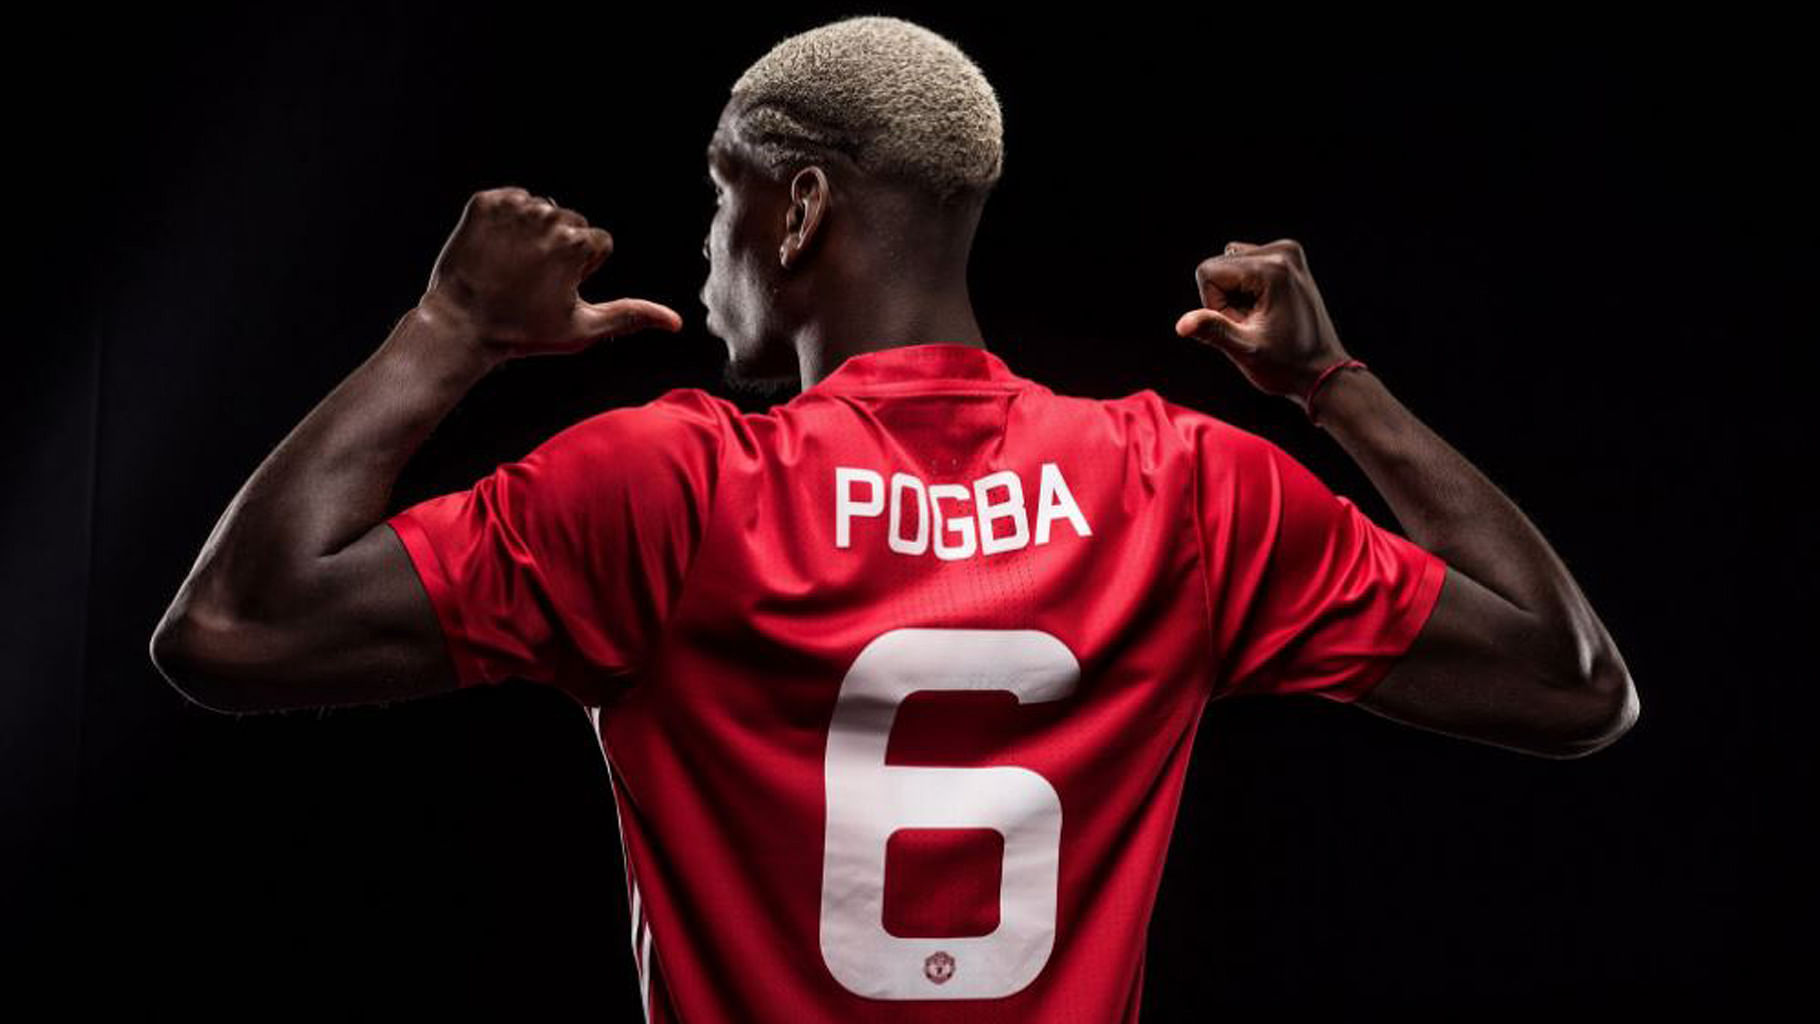 Paul Pogba was the biggest summer transfer in 2016/17. (Photo: Twitter/<a href="https://twitter.com/ManUtd/media">@Manchester United</a>)